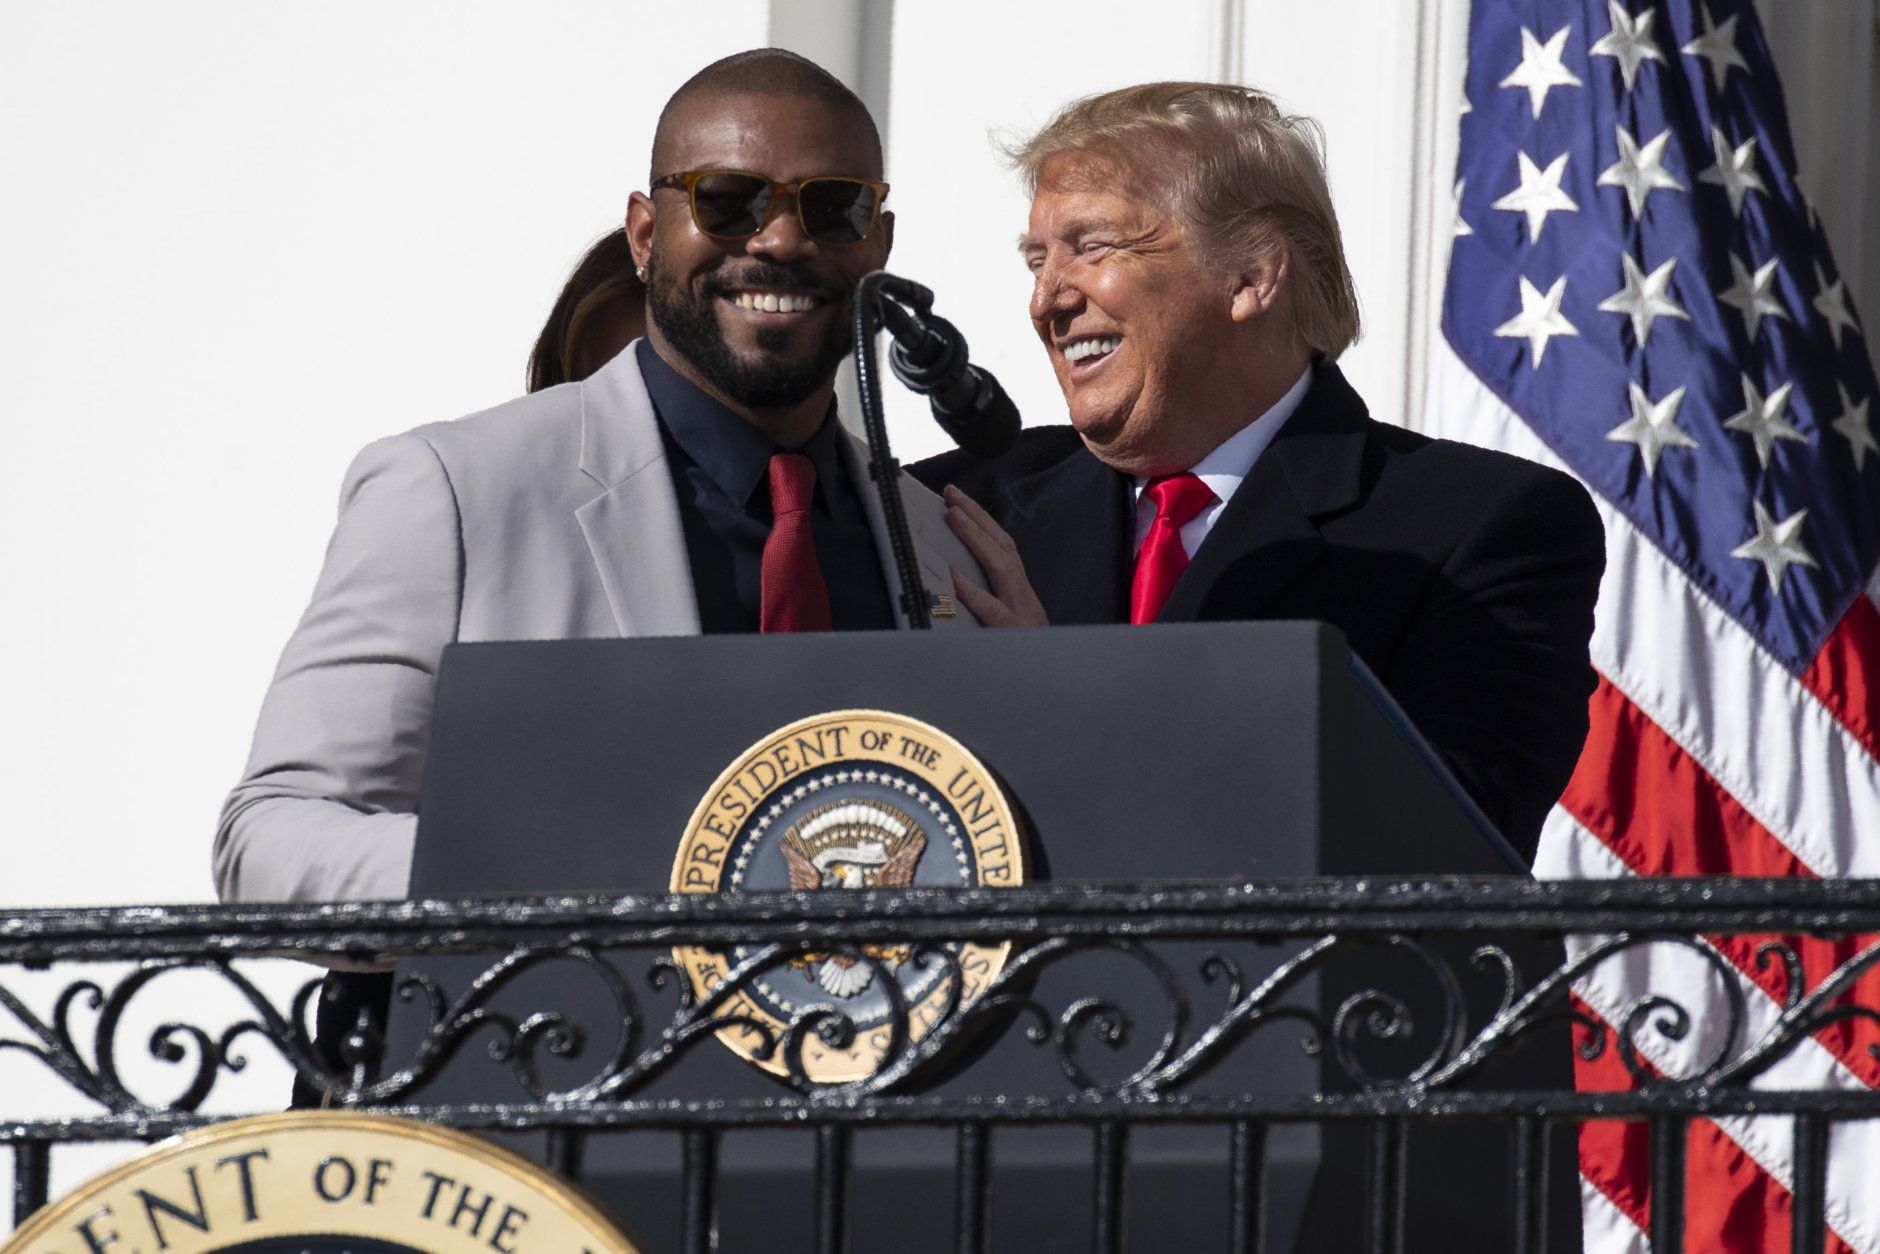 President Donald Trump invites Washington Nationals infielder Howie Kendrick to speak during an event to honor the 2019 World Series Champion, Washington Nationals baseball team, at the White House, Monday, Nov. 4, 2019, in Washington. (AP Photo/ Evan Vucci)